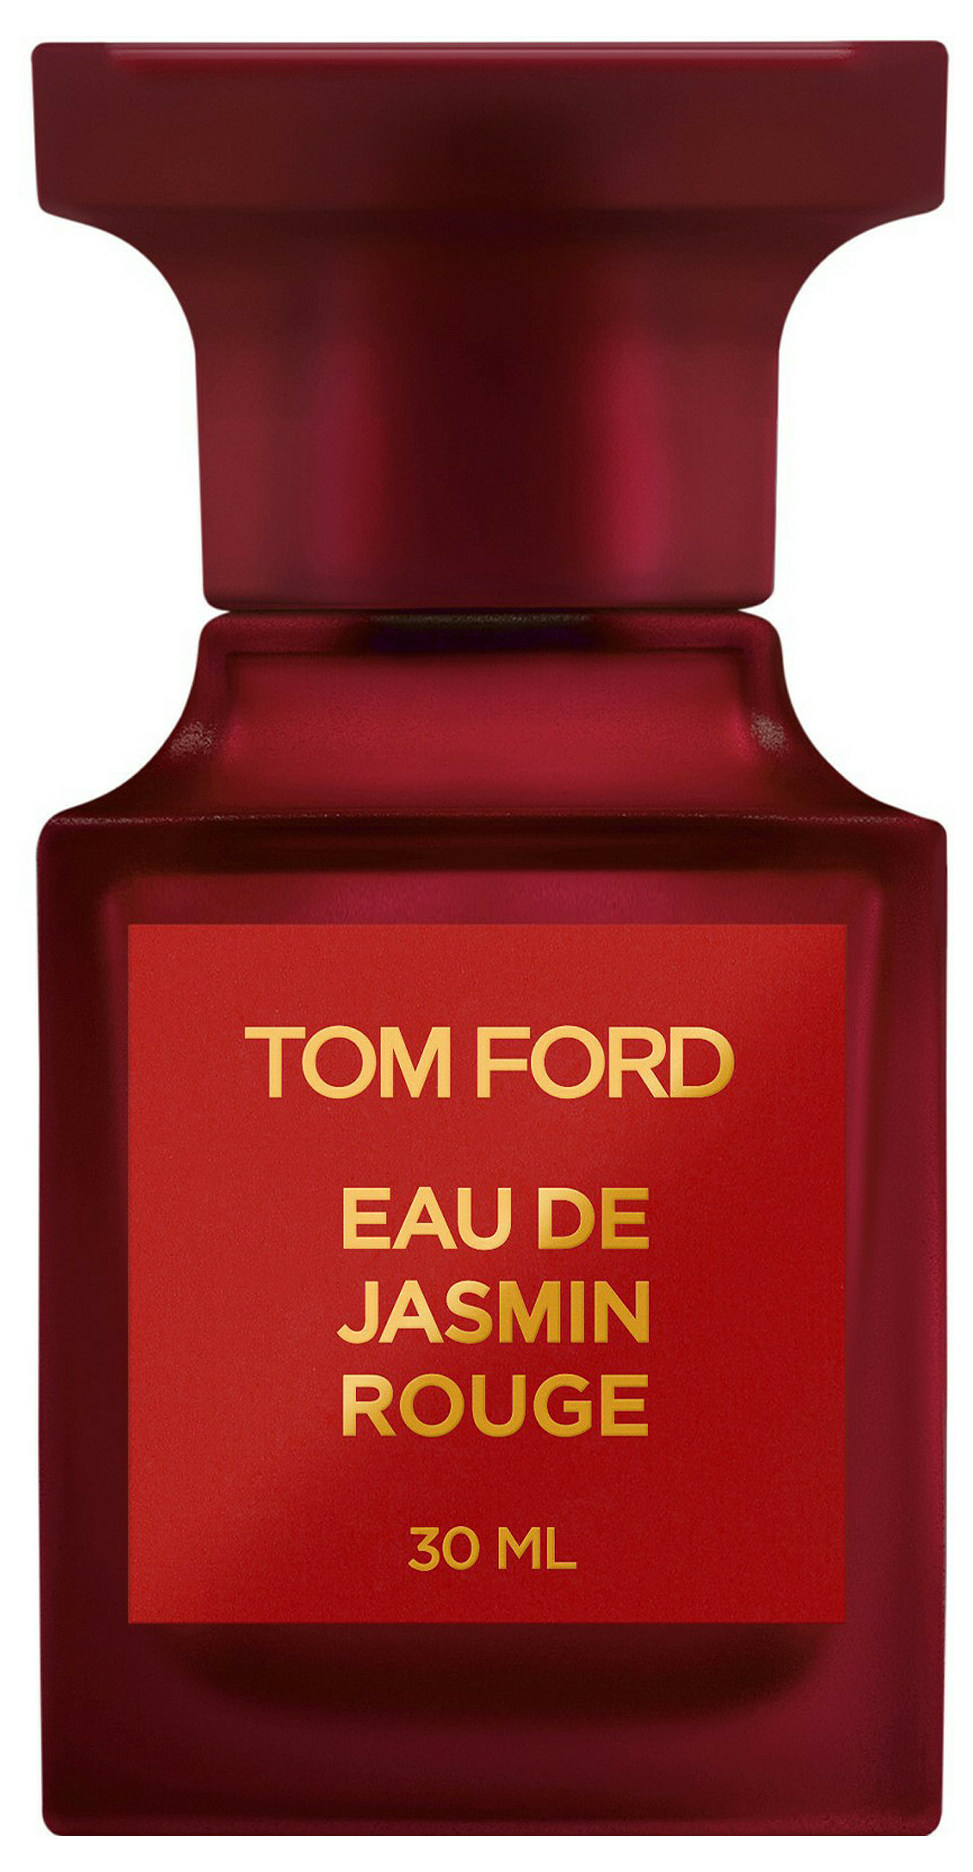 Eau de Jasmin Rouge by Tom Ford » Reviews & Perfume Facts